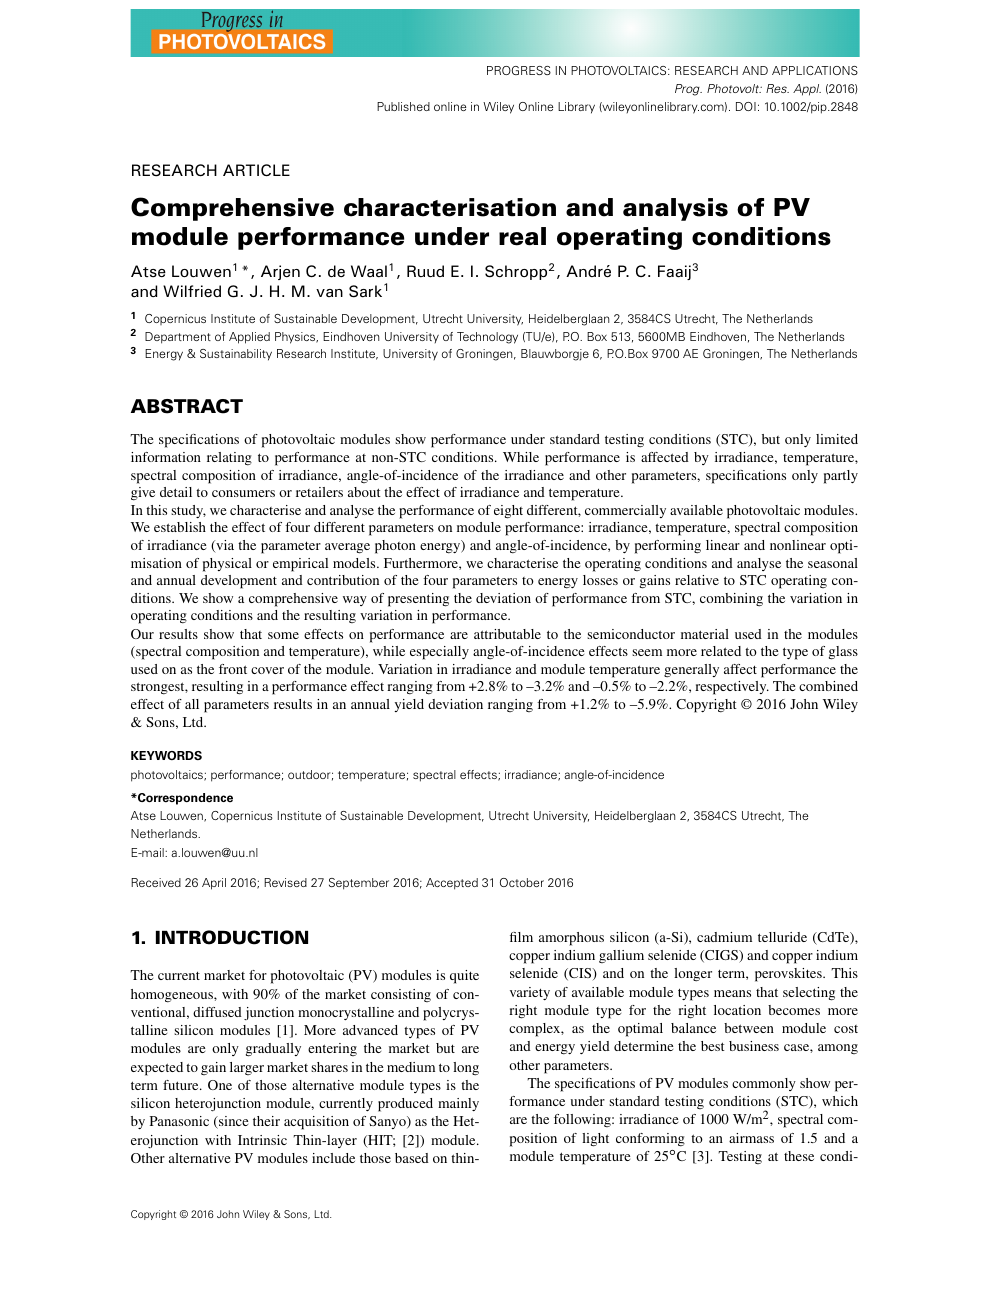 Comprehensive Characterisation And Analysis Of Pv Module Performance Under Real Operating Conditions Topic Of Research Paper In Earth And Related Environmental Sciences Download Scholarly Article Pdf And Read For Free On